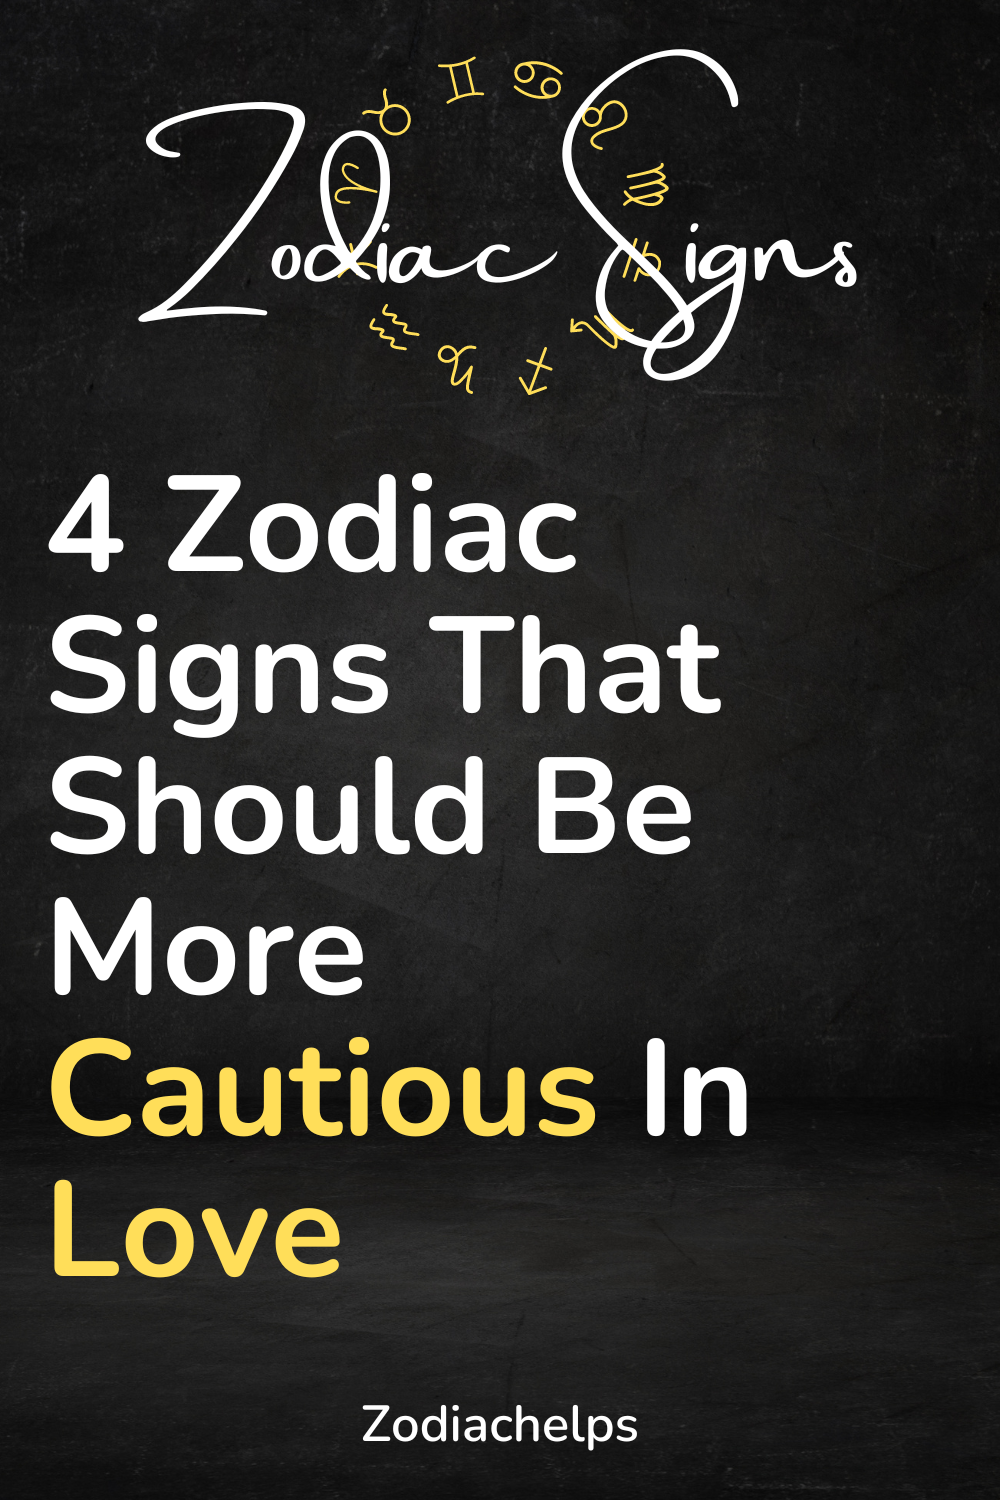 4 Zodiac Signs That Should Be More Cautious In Love